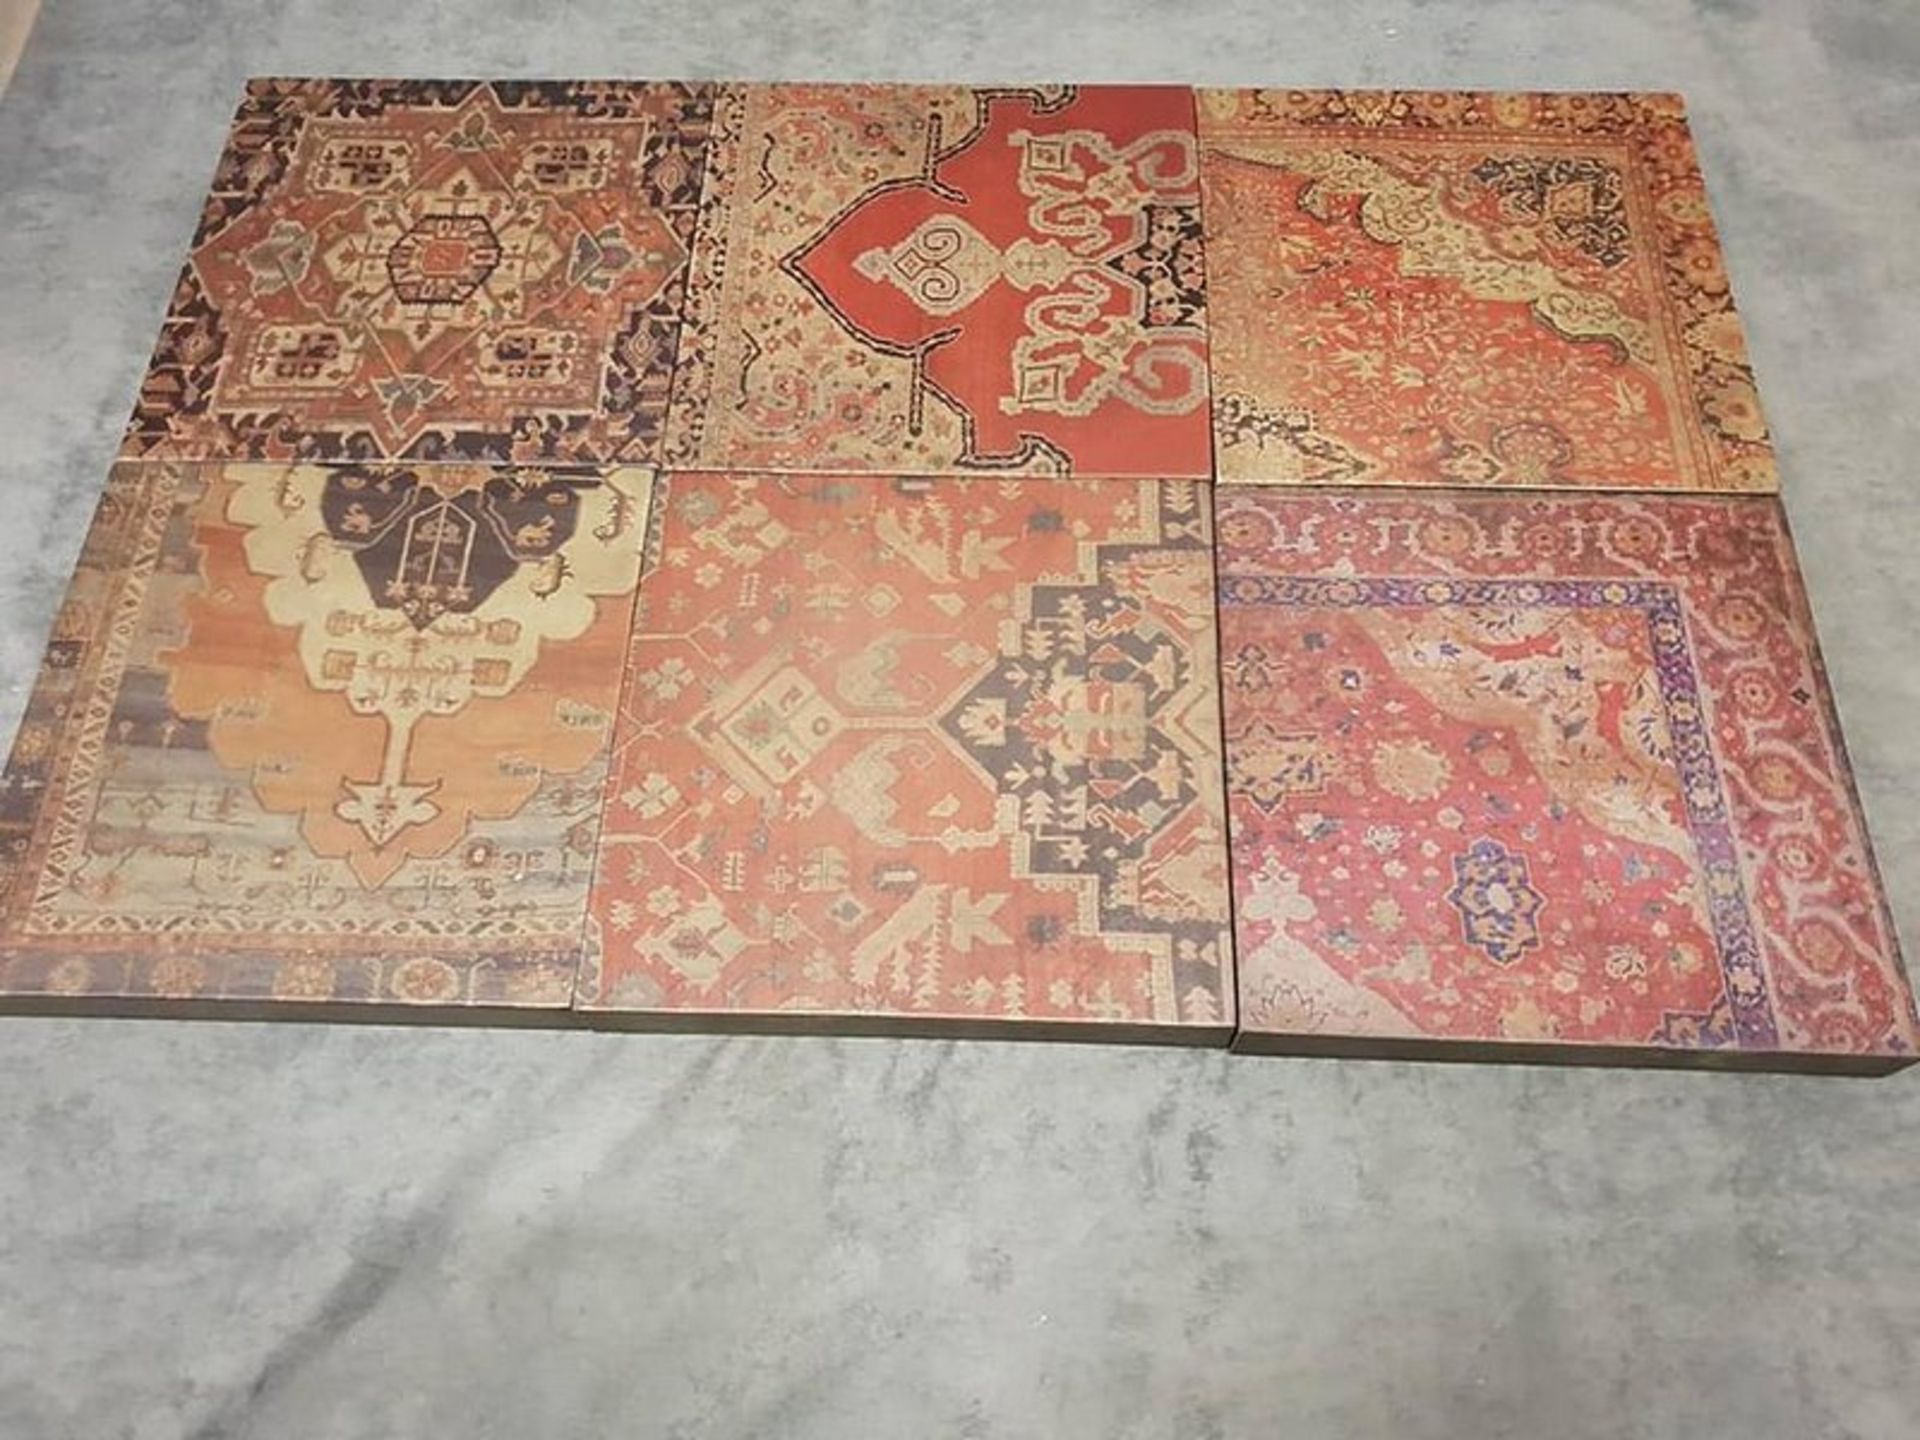 Coup and Co Art Persian Carpet Wall Tiles - Colour Persian Carpet Wall Tiles Full Colour Set Of 6